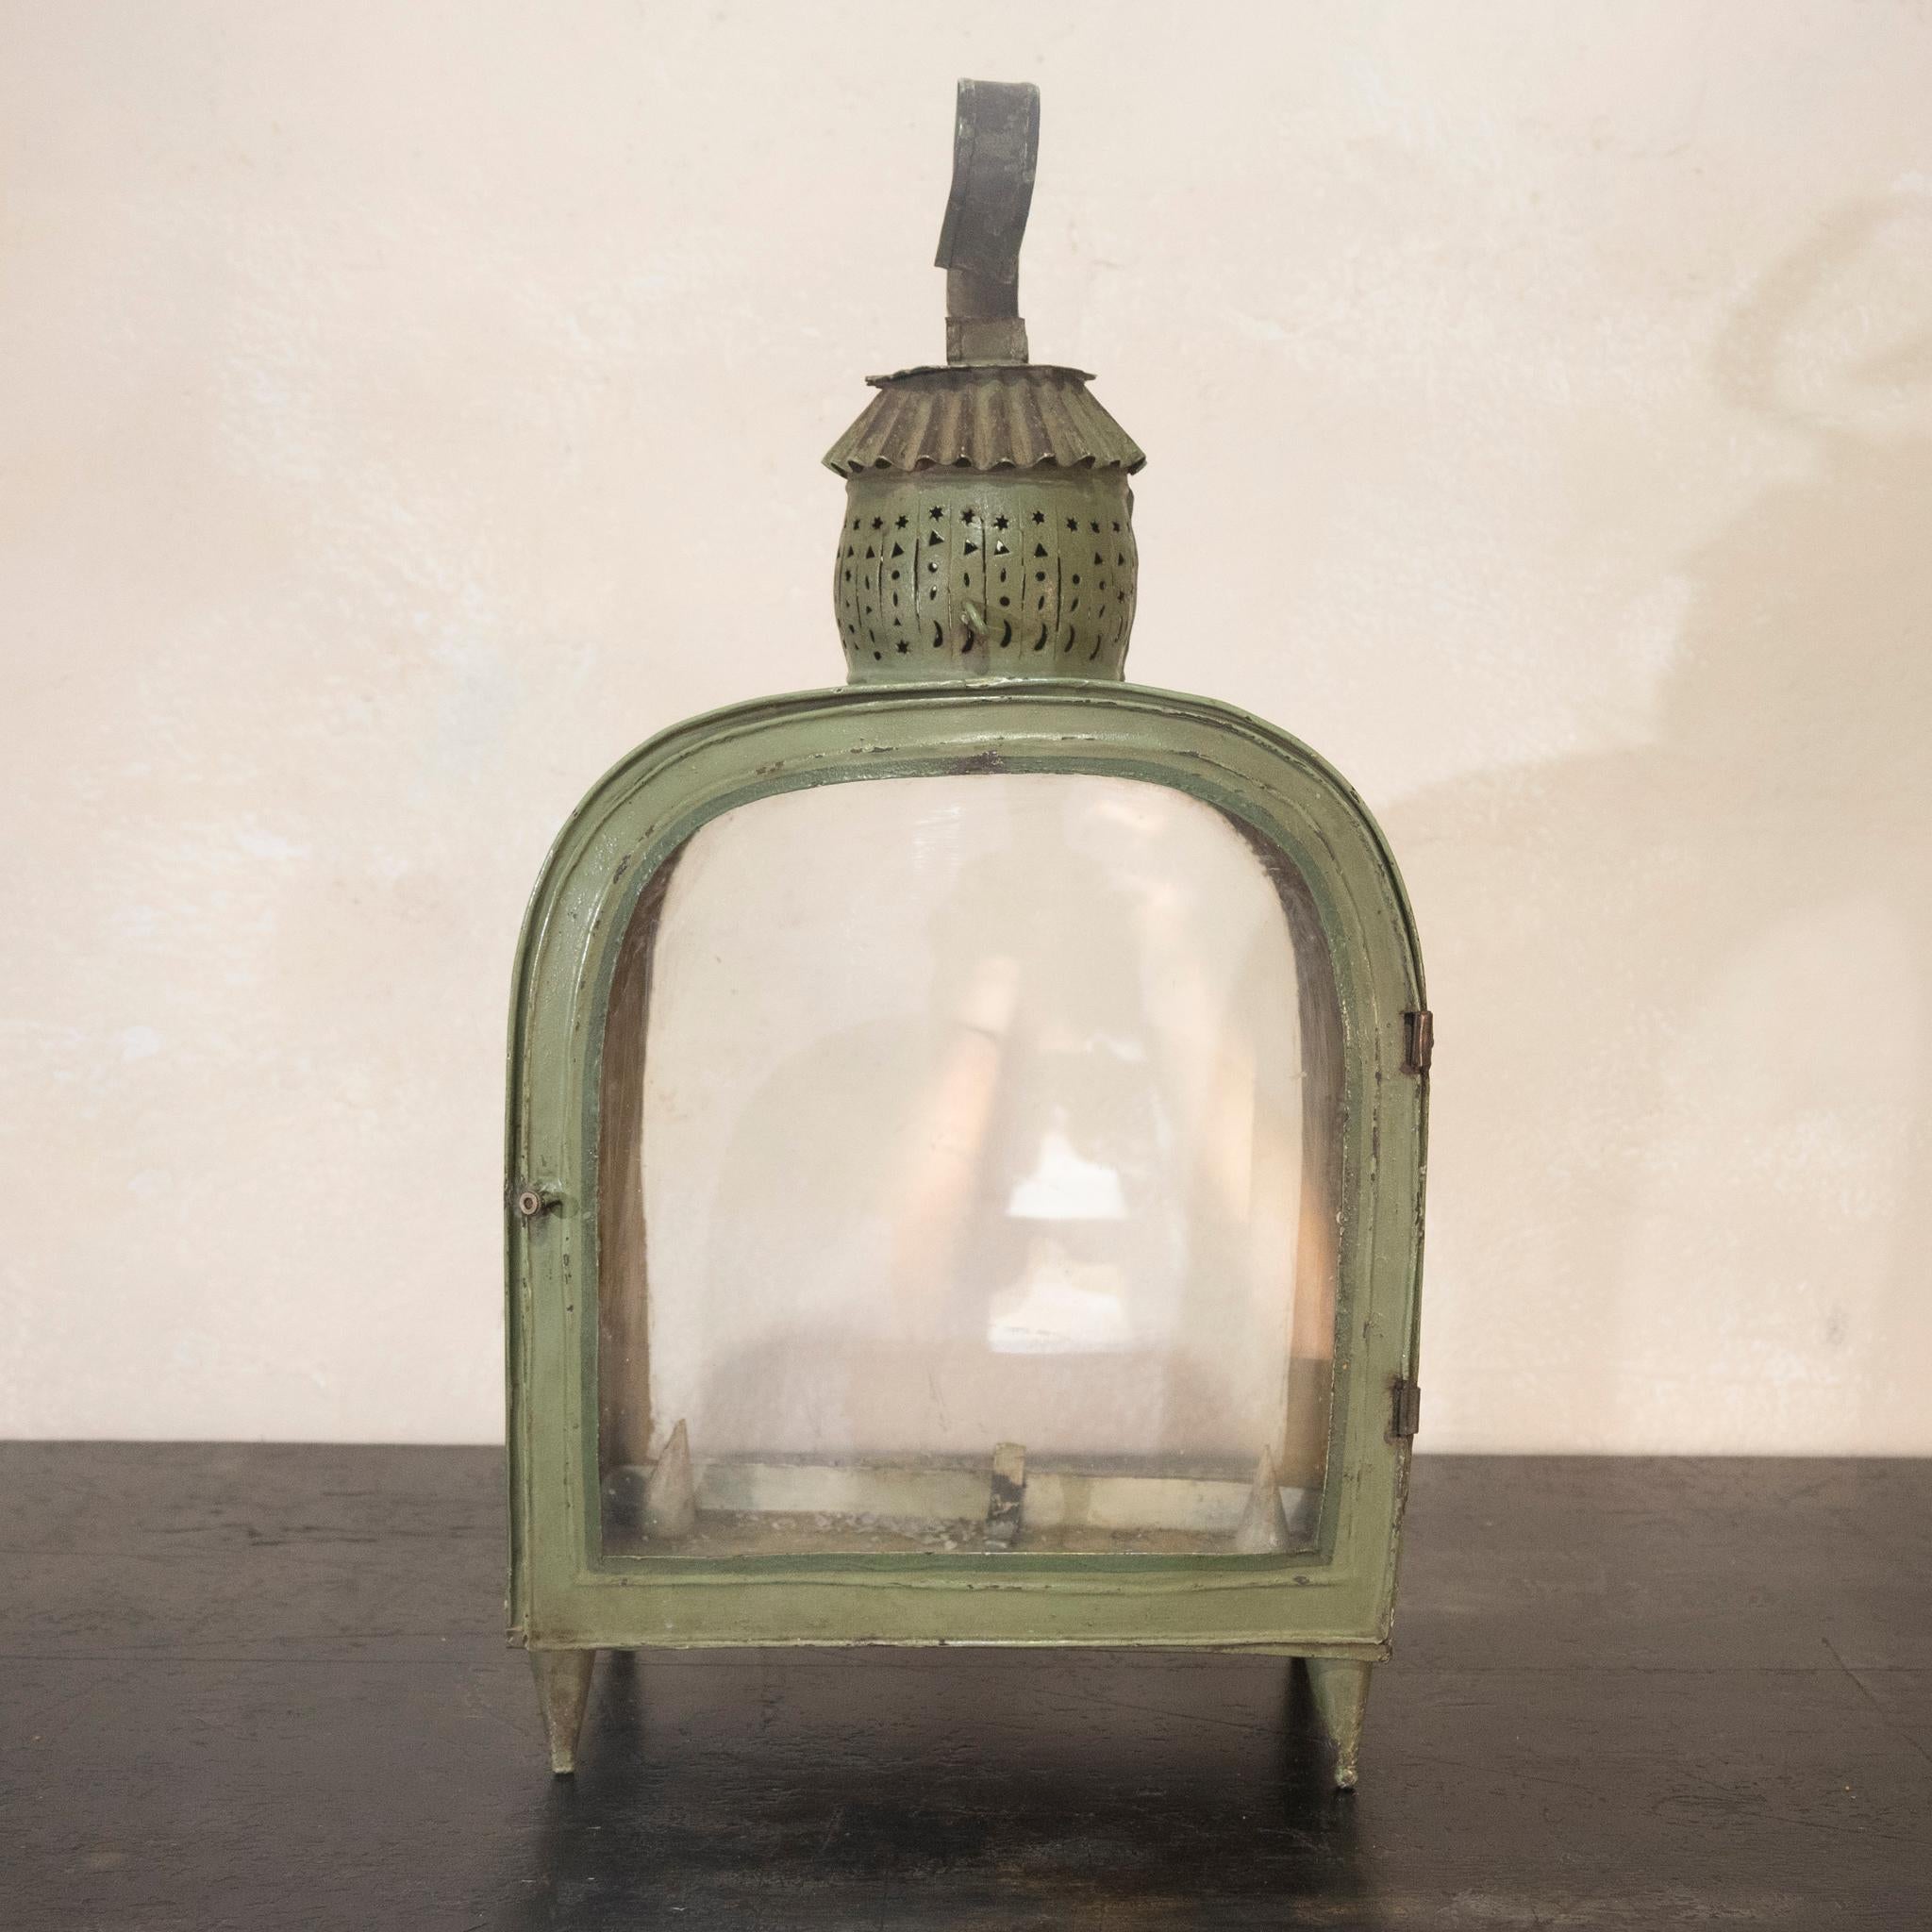 A charming 20th century French green toleware lantern, with pierced decoration in the form of stars and circles. Raised on cone-shaped feet with arched glazed windows and a door. 
 
Measures: Height - 48cm
Width - 25cm 
Depth - 13cm.